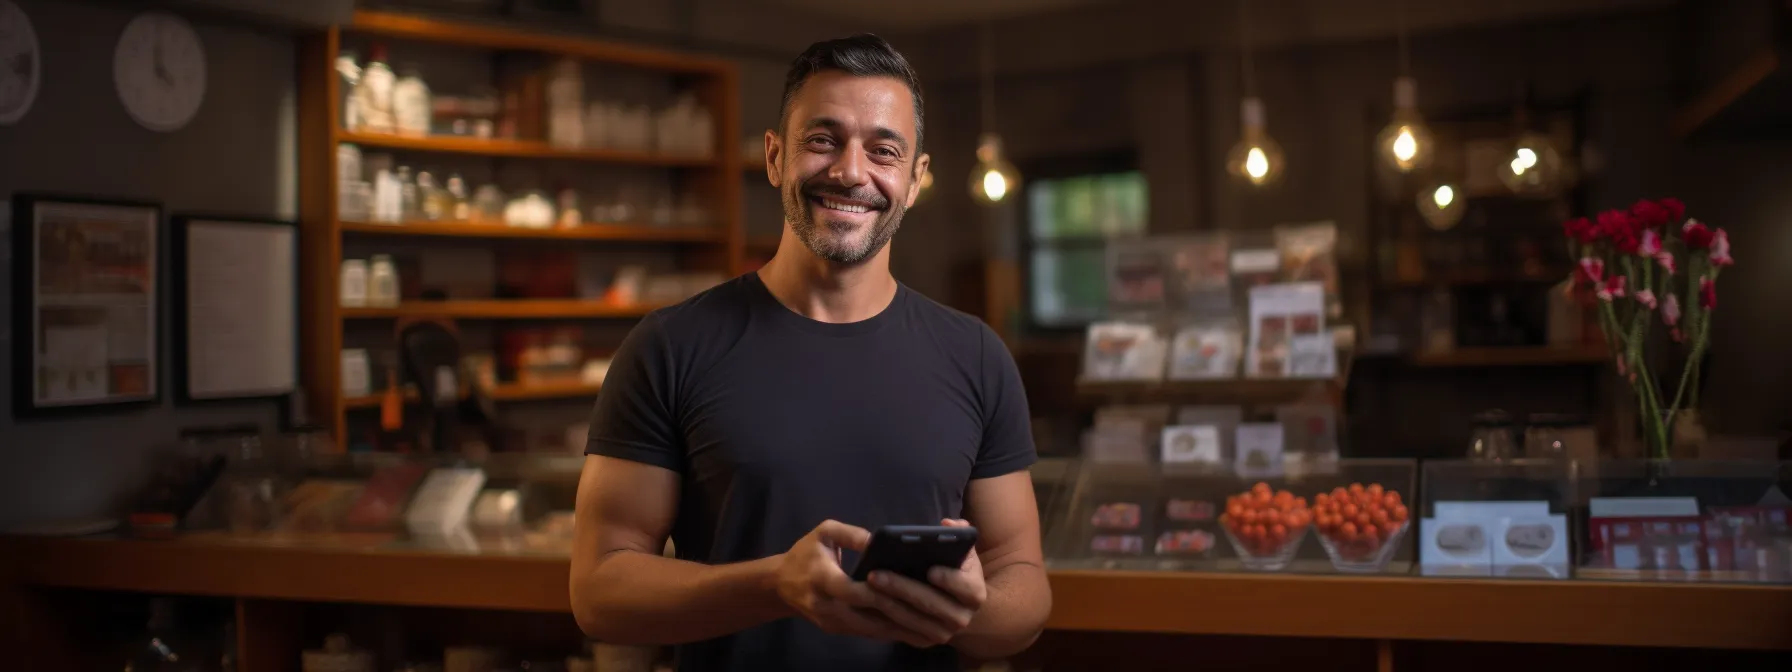 a shop owner smiling and holding a tablet with multiple positive google reviews displayed.